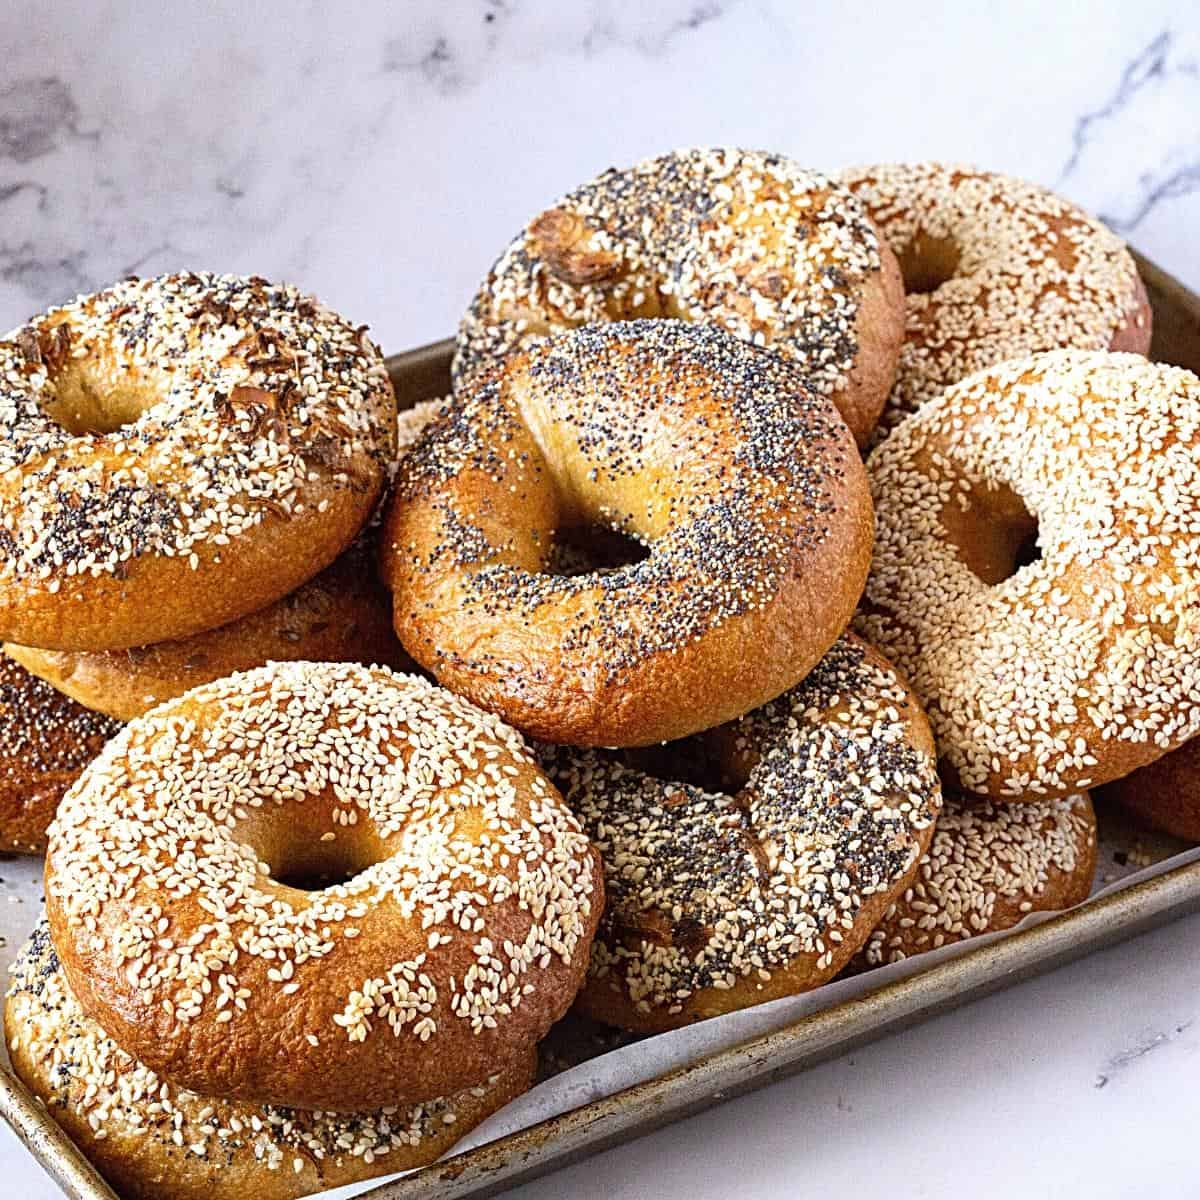 A baking tray with a variety of bagels topped with different toppings.